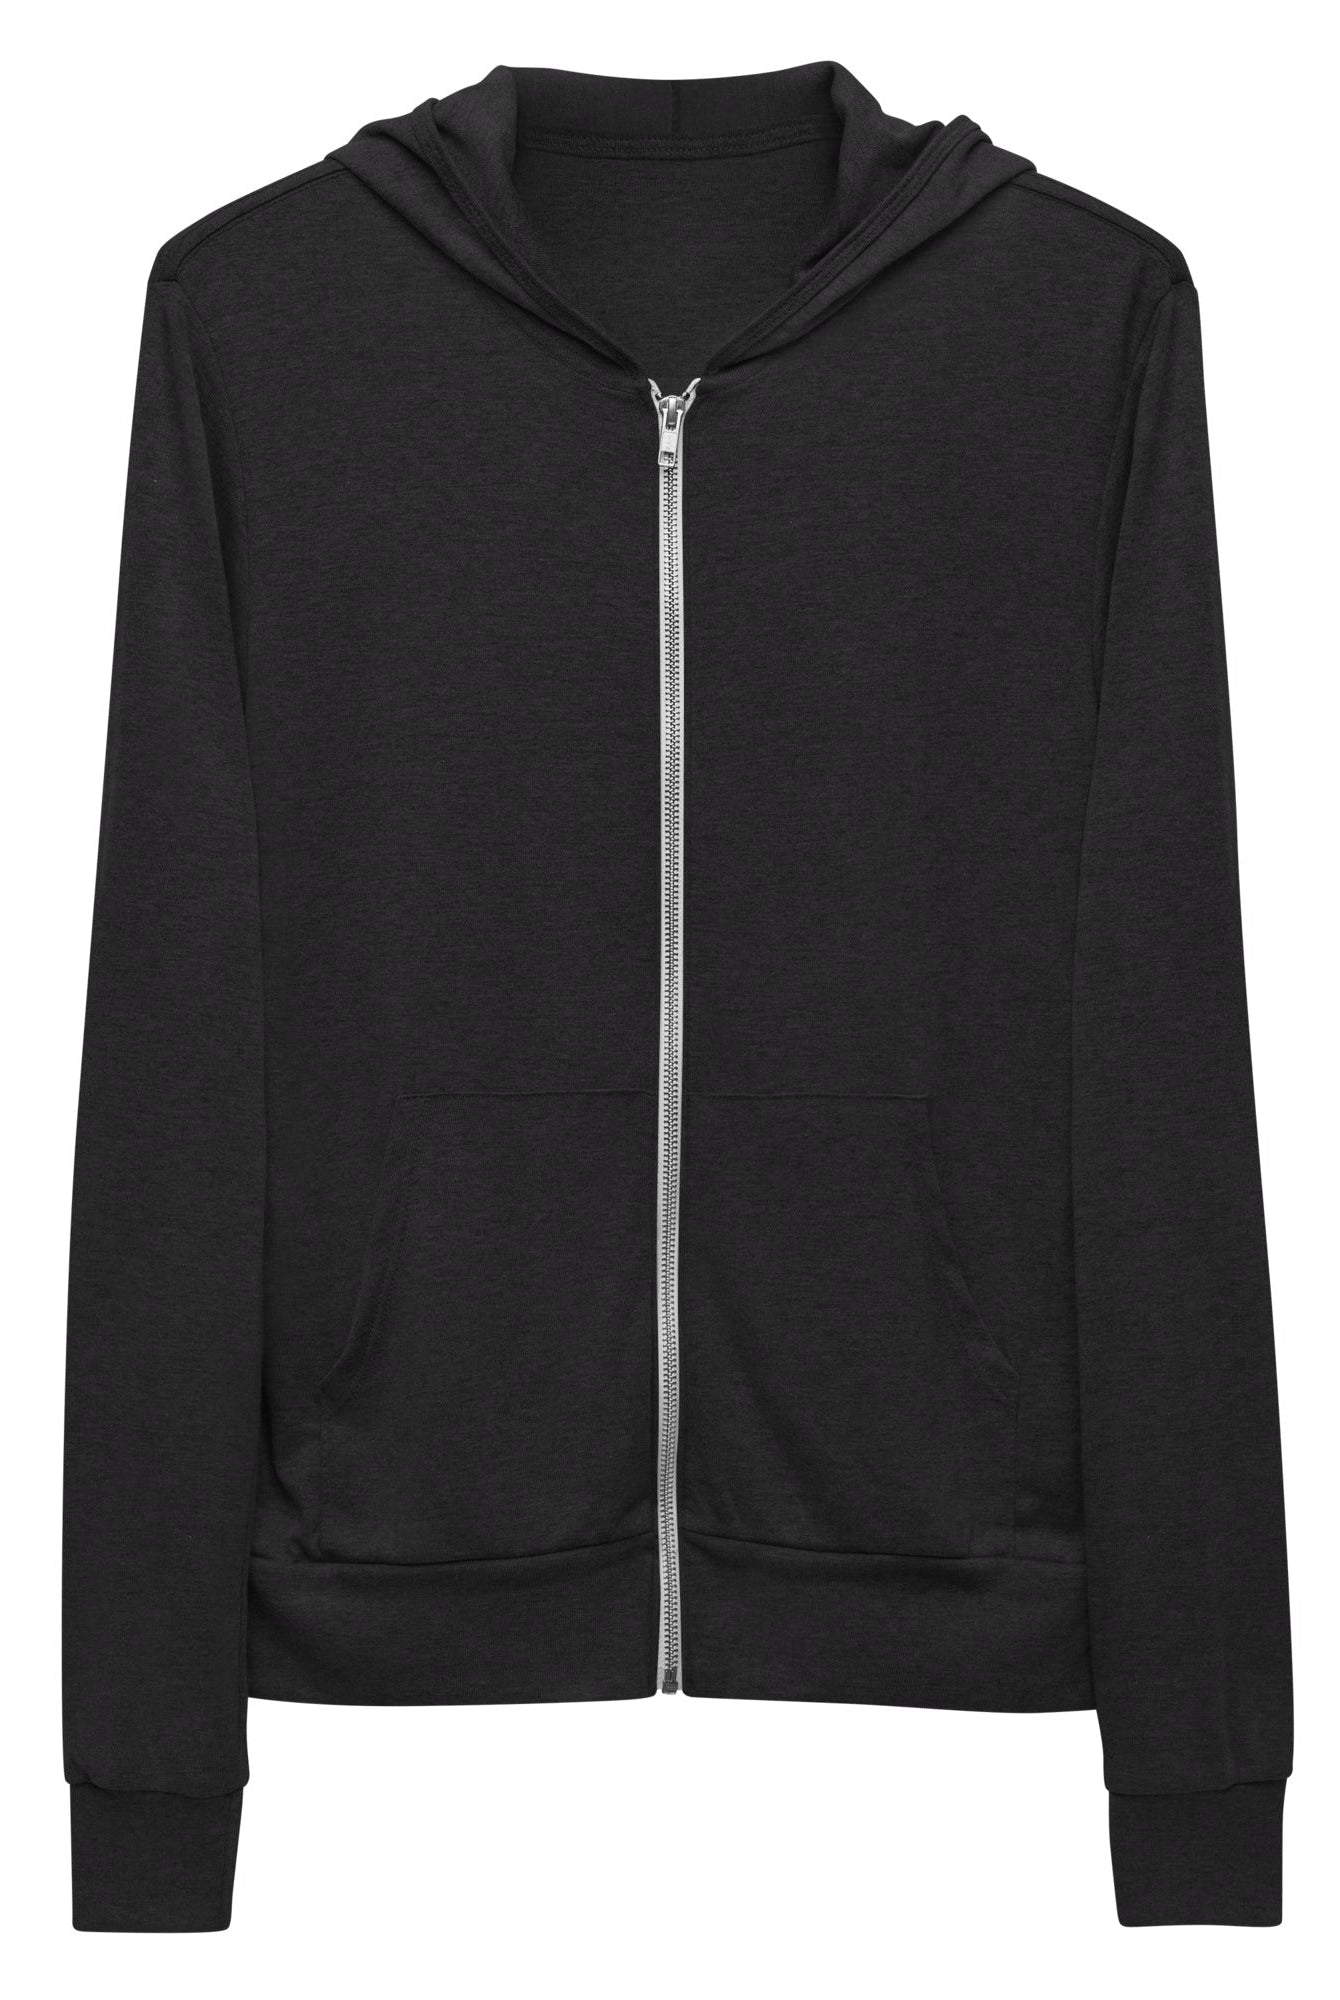 Bellybunny Women's Zip-Up Hoodie-Charcoal black Triblend with white logo-front